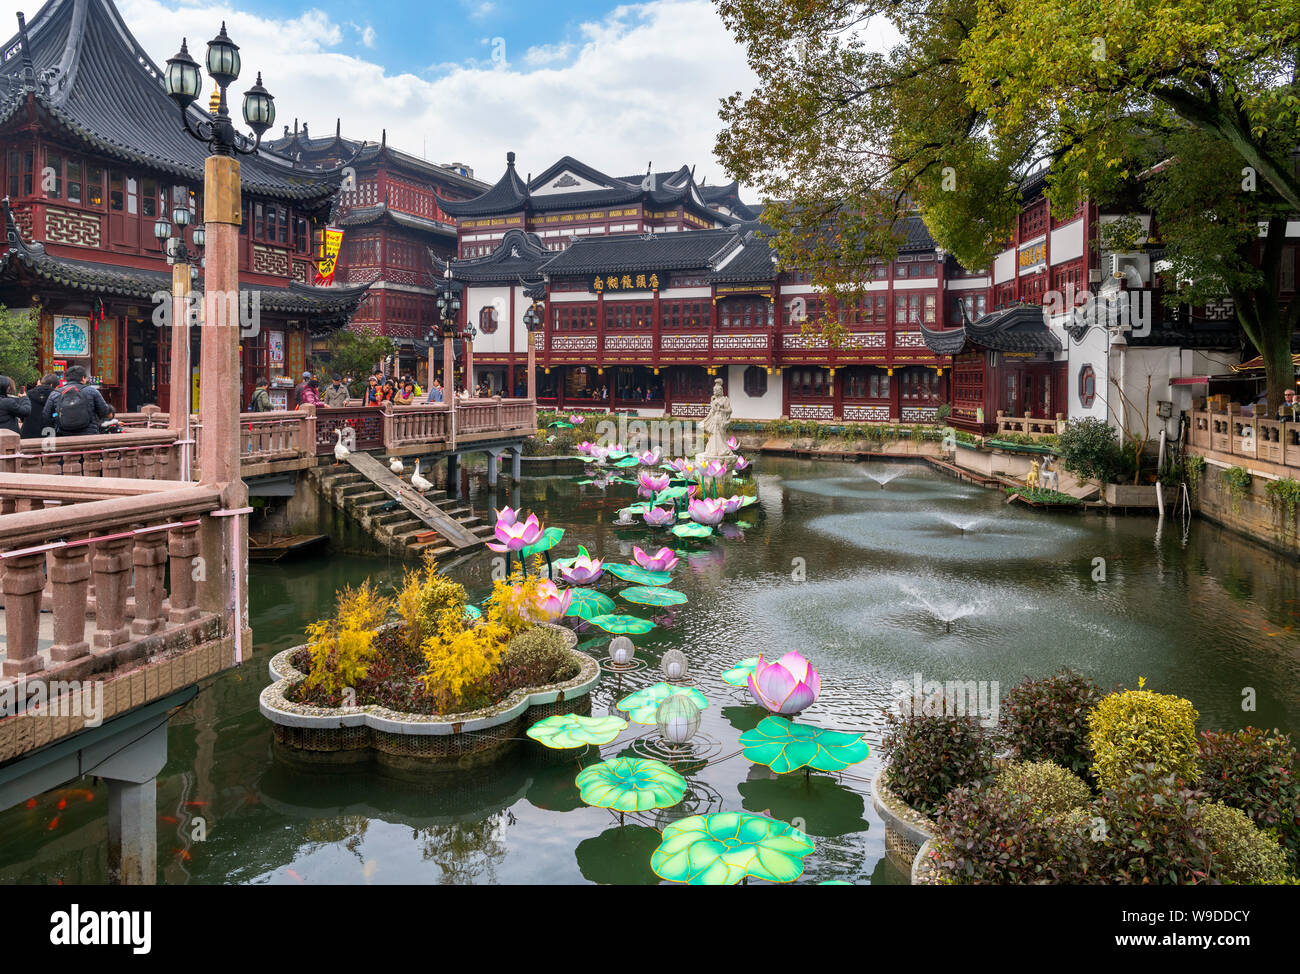 Yu Garden Pond In The Yu Garden Tourist Mart With The Huxinting Tea House To The Left Yuyuan Gardens Old City Shanghai China Stock Photo Alamy